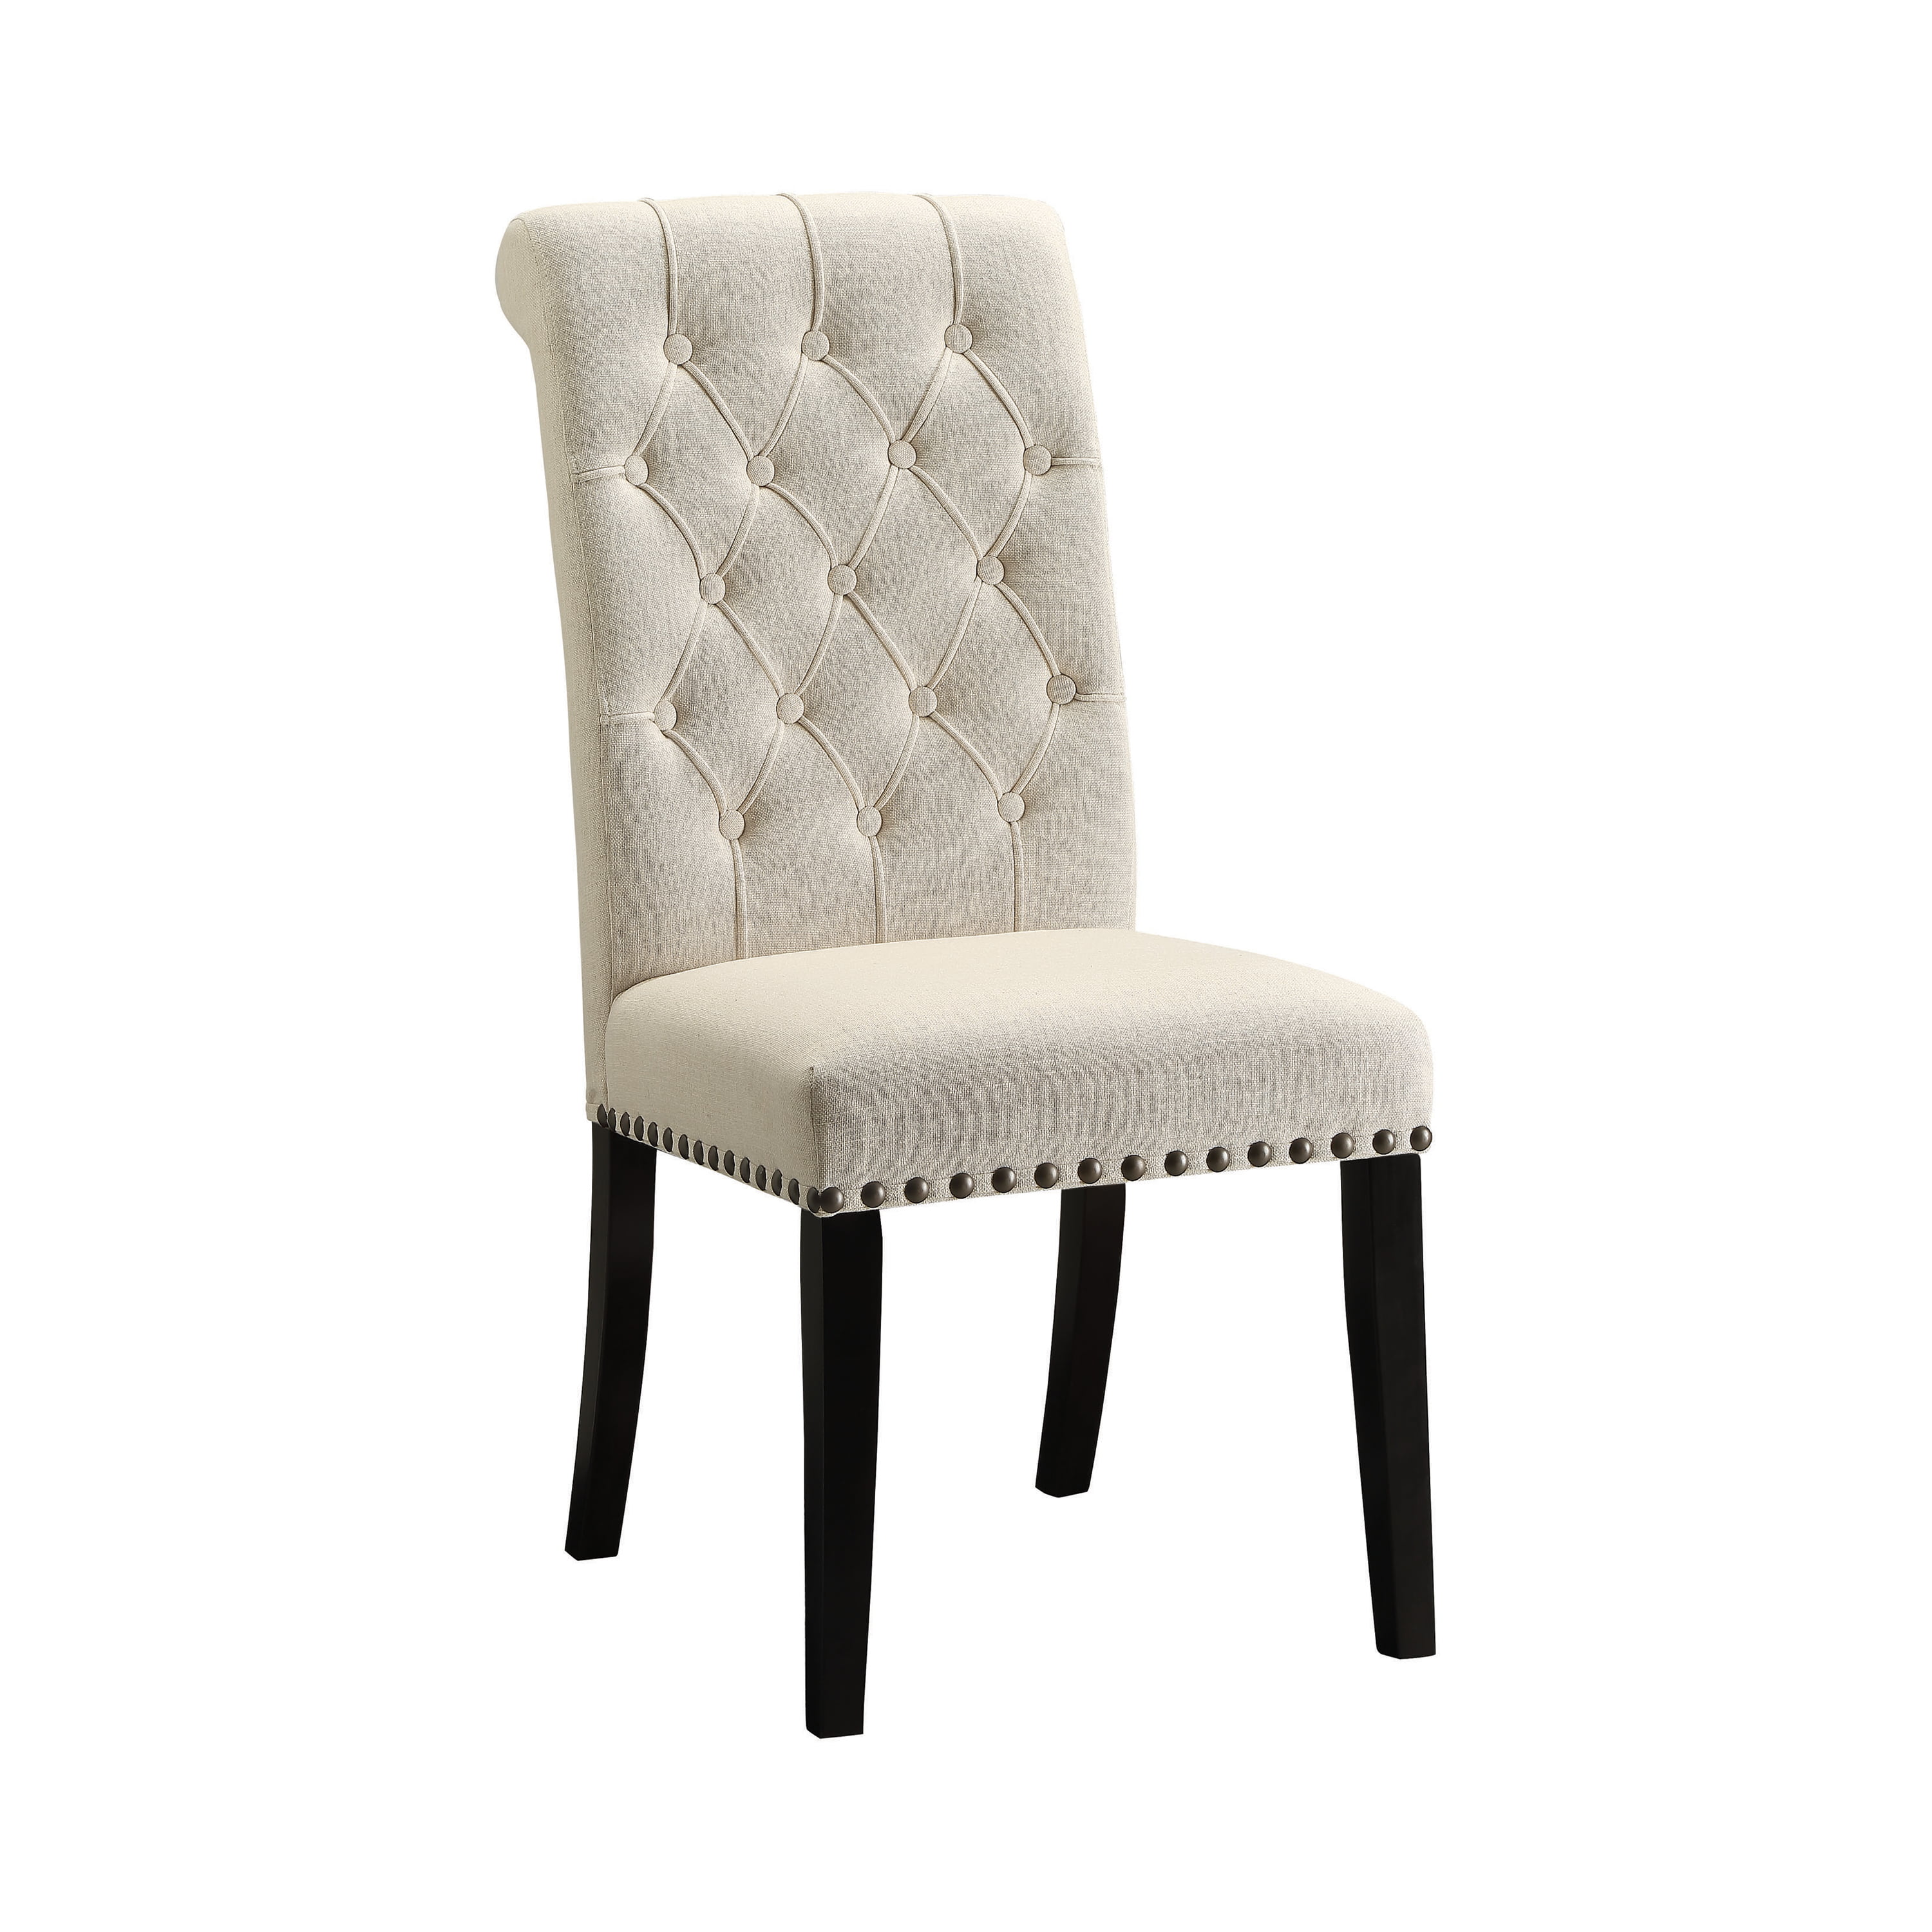 Tufted Back Upholstered Side Chairs, Tufted Nailhead Chairs